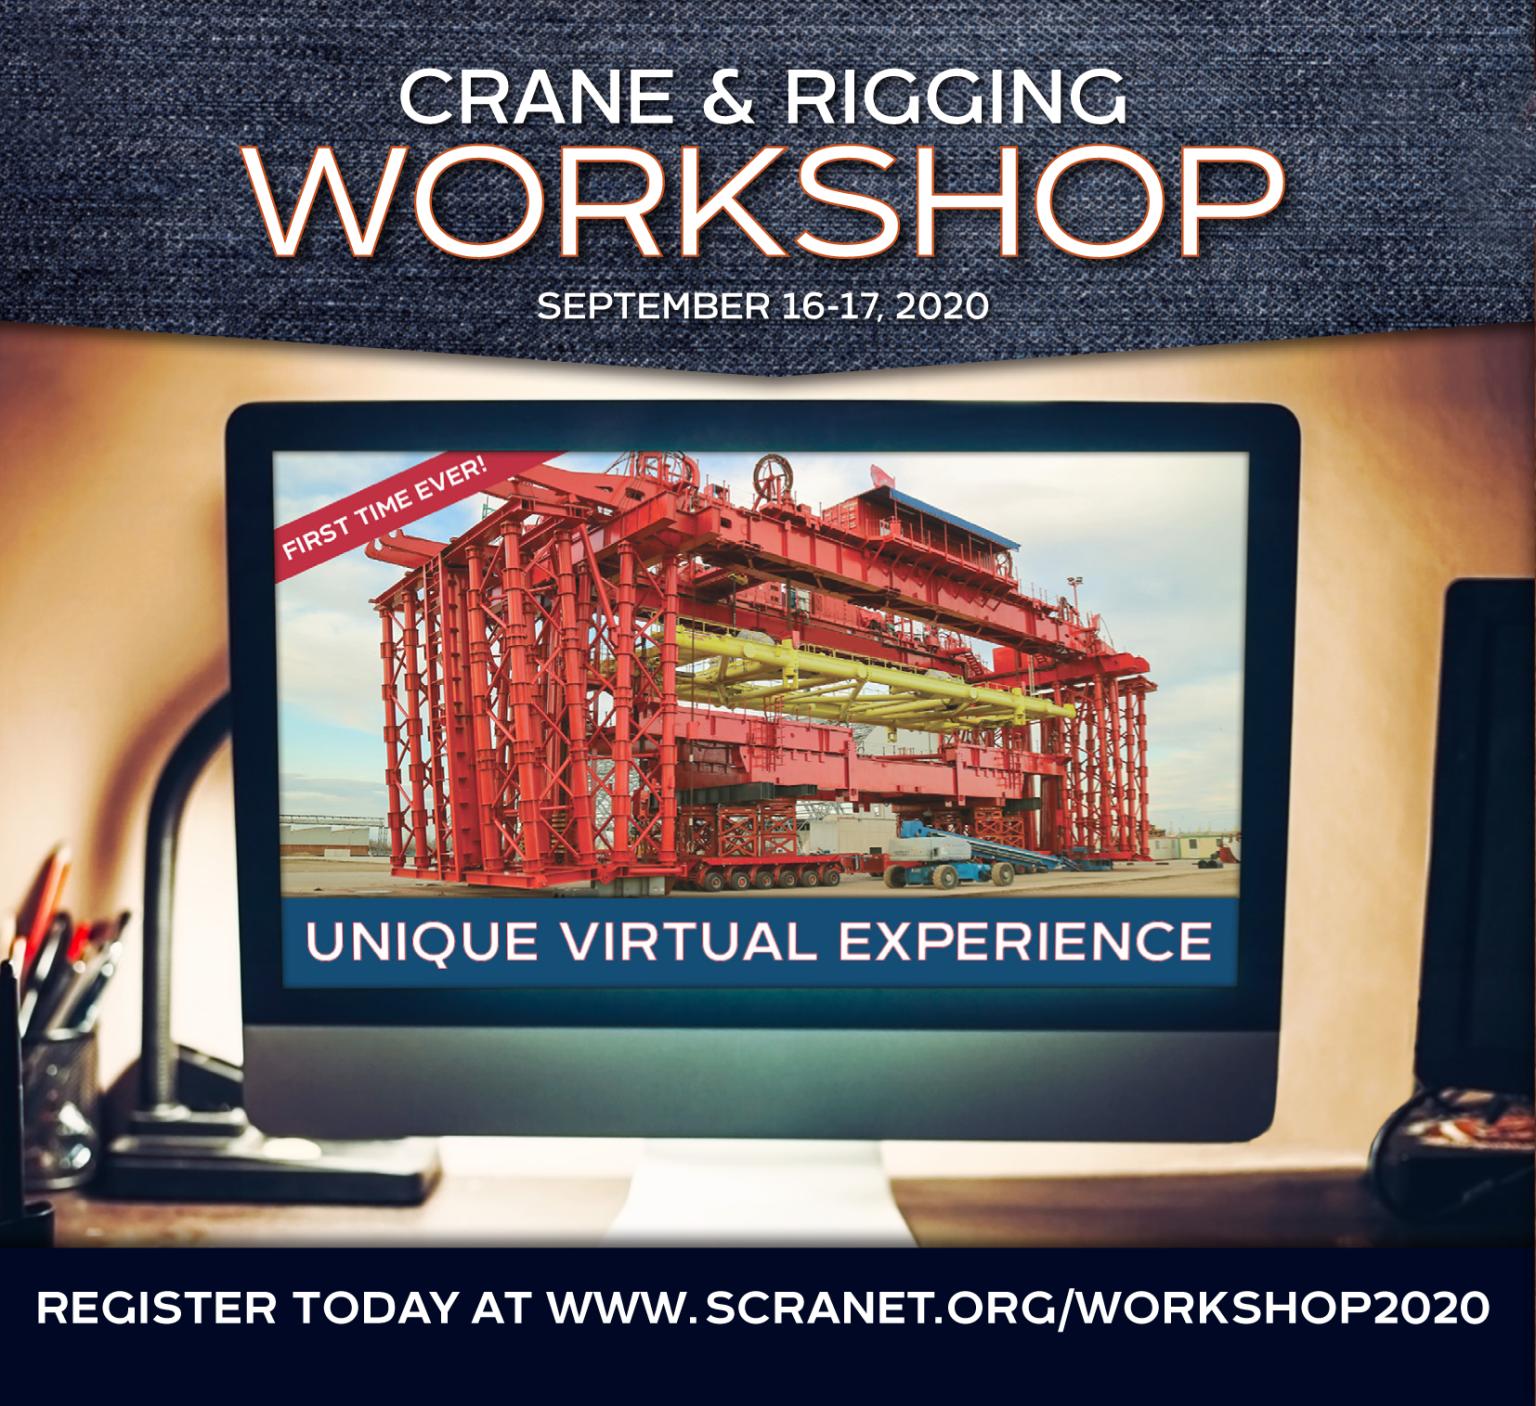 SC&RA Crane and Rigging Workshop Taking Place Online in 2020